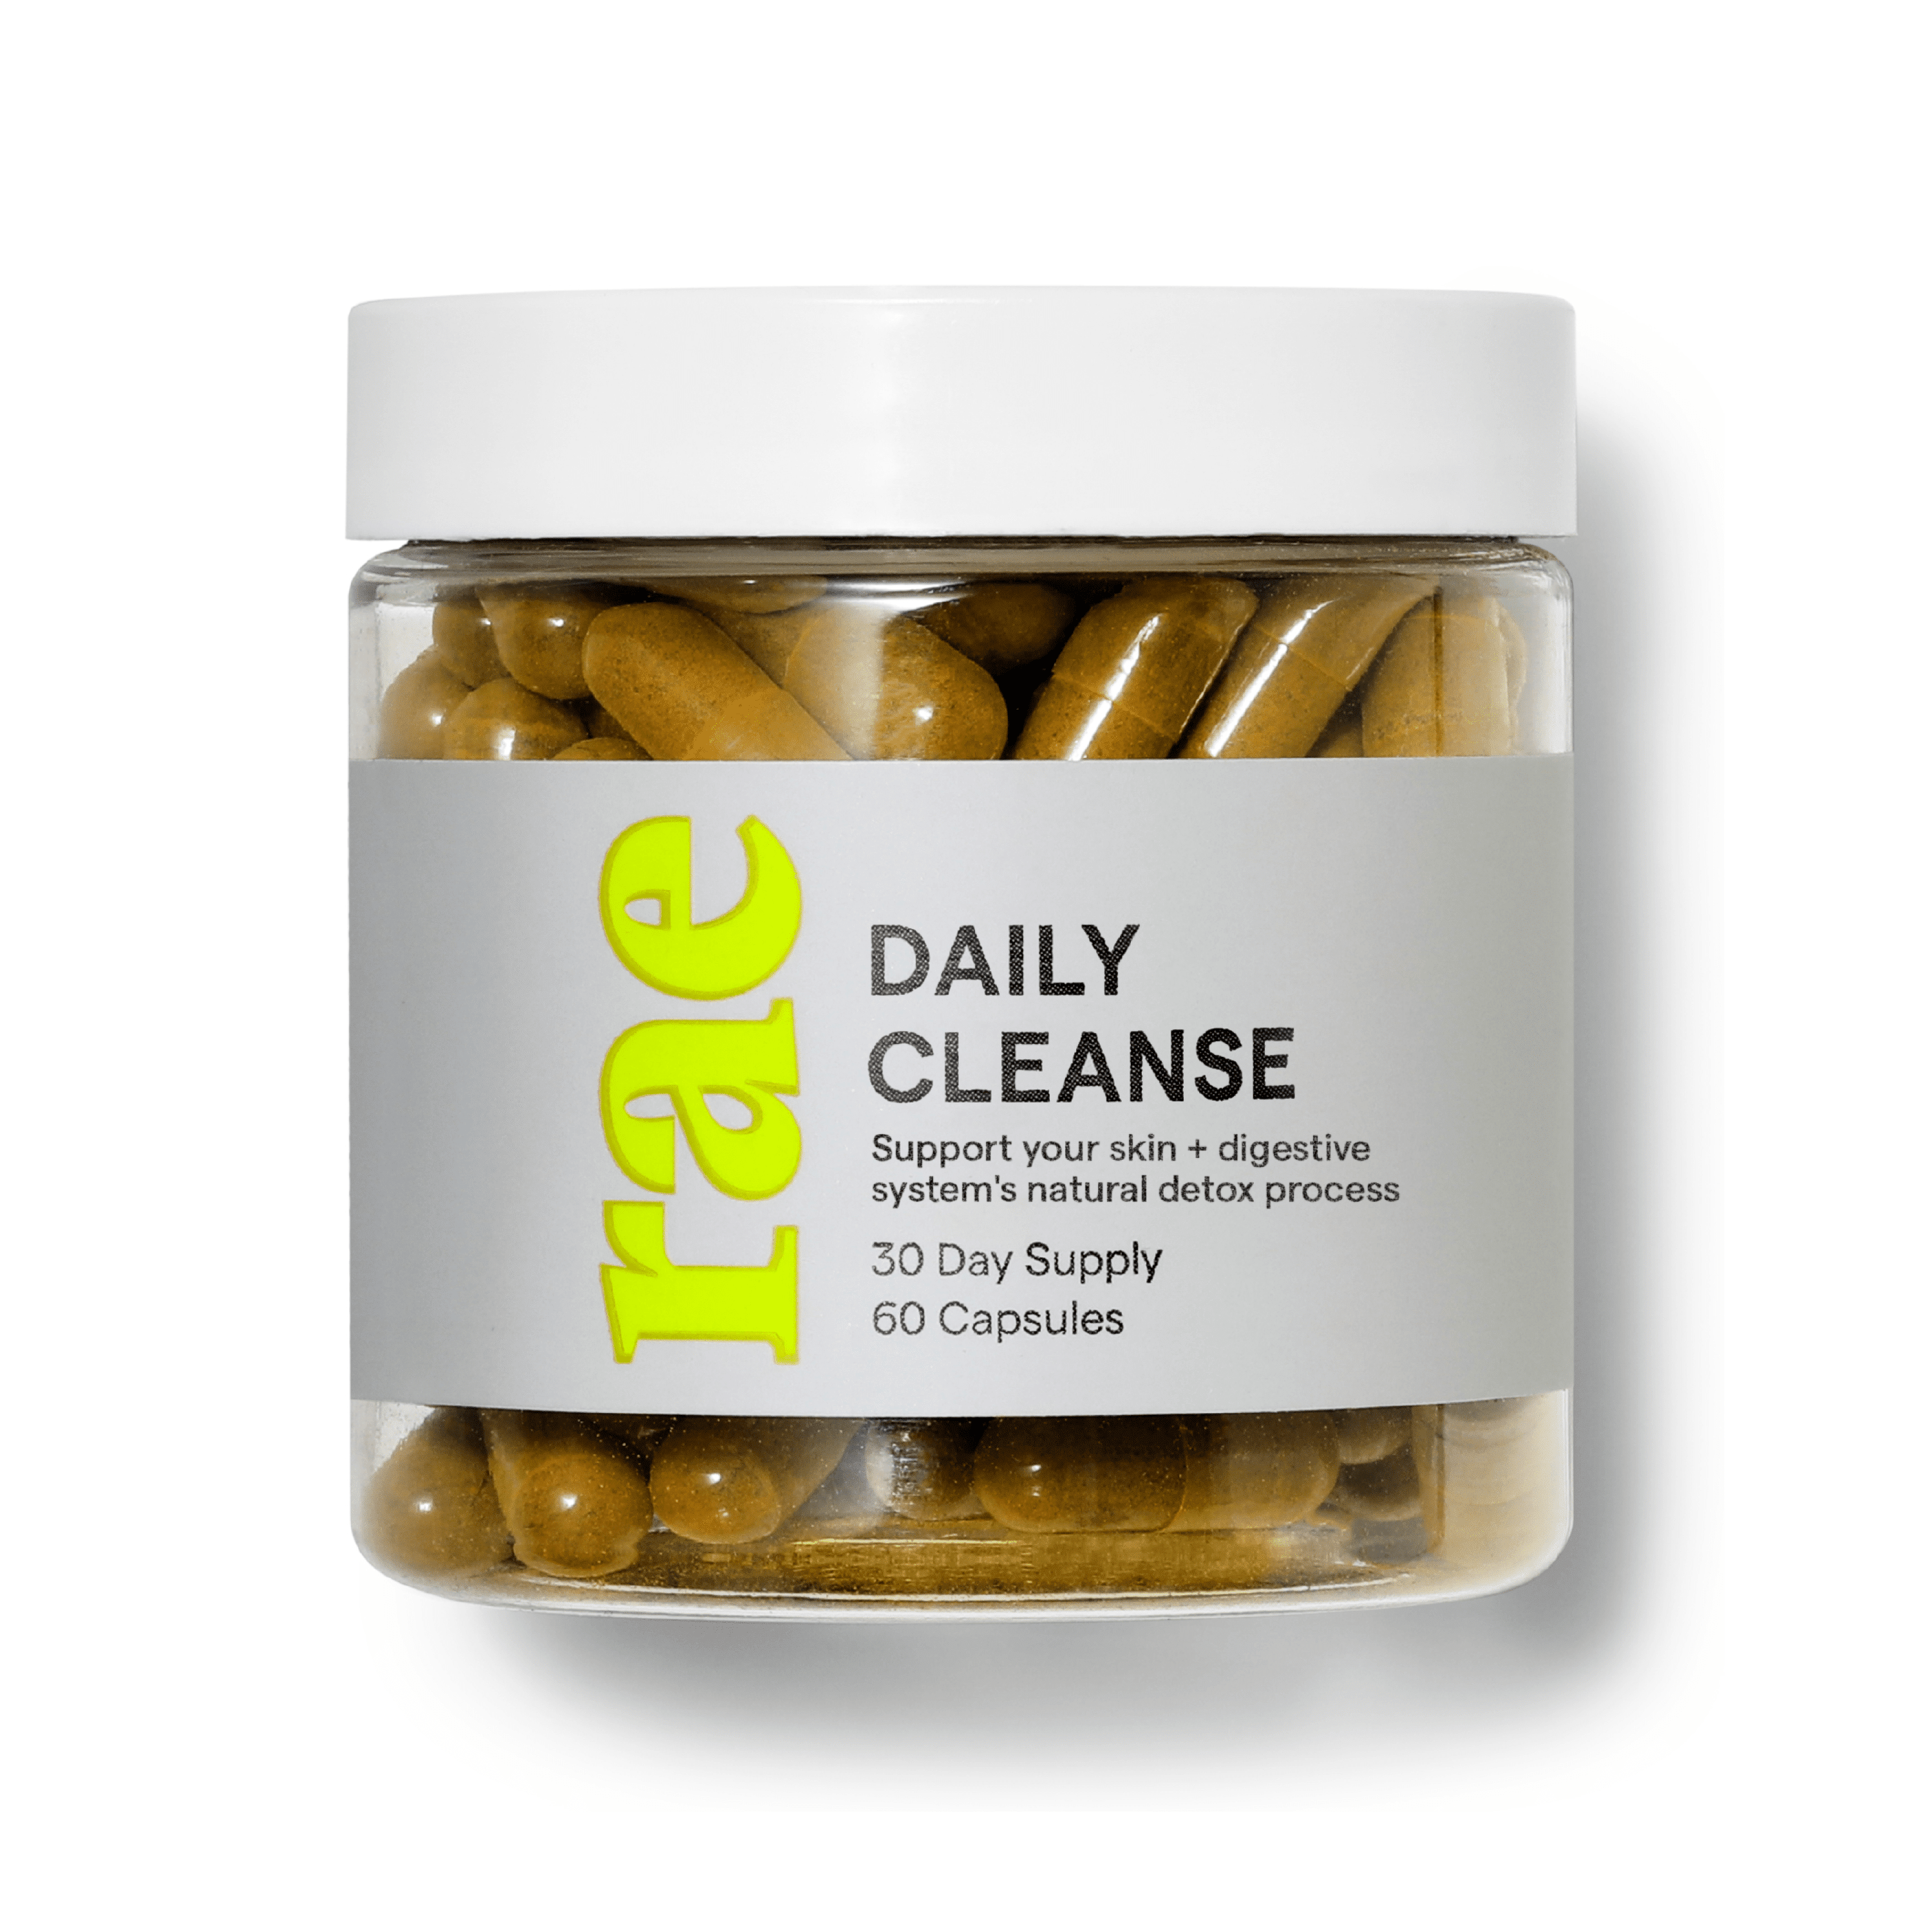 Rae Wellness Daily Cleanse Supplement, for Skin and Digestive System, 60 Capsules